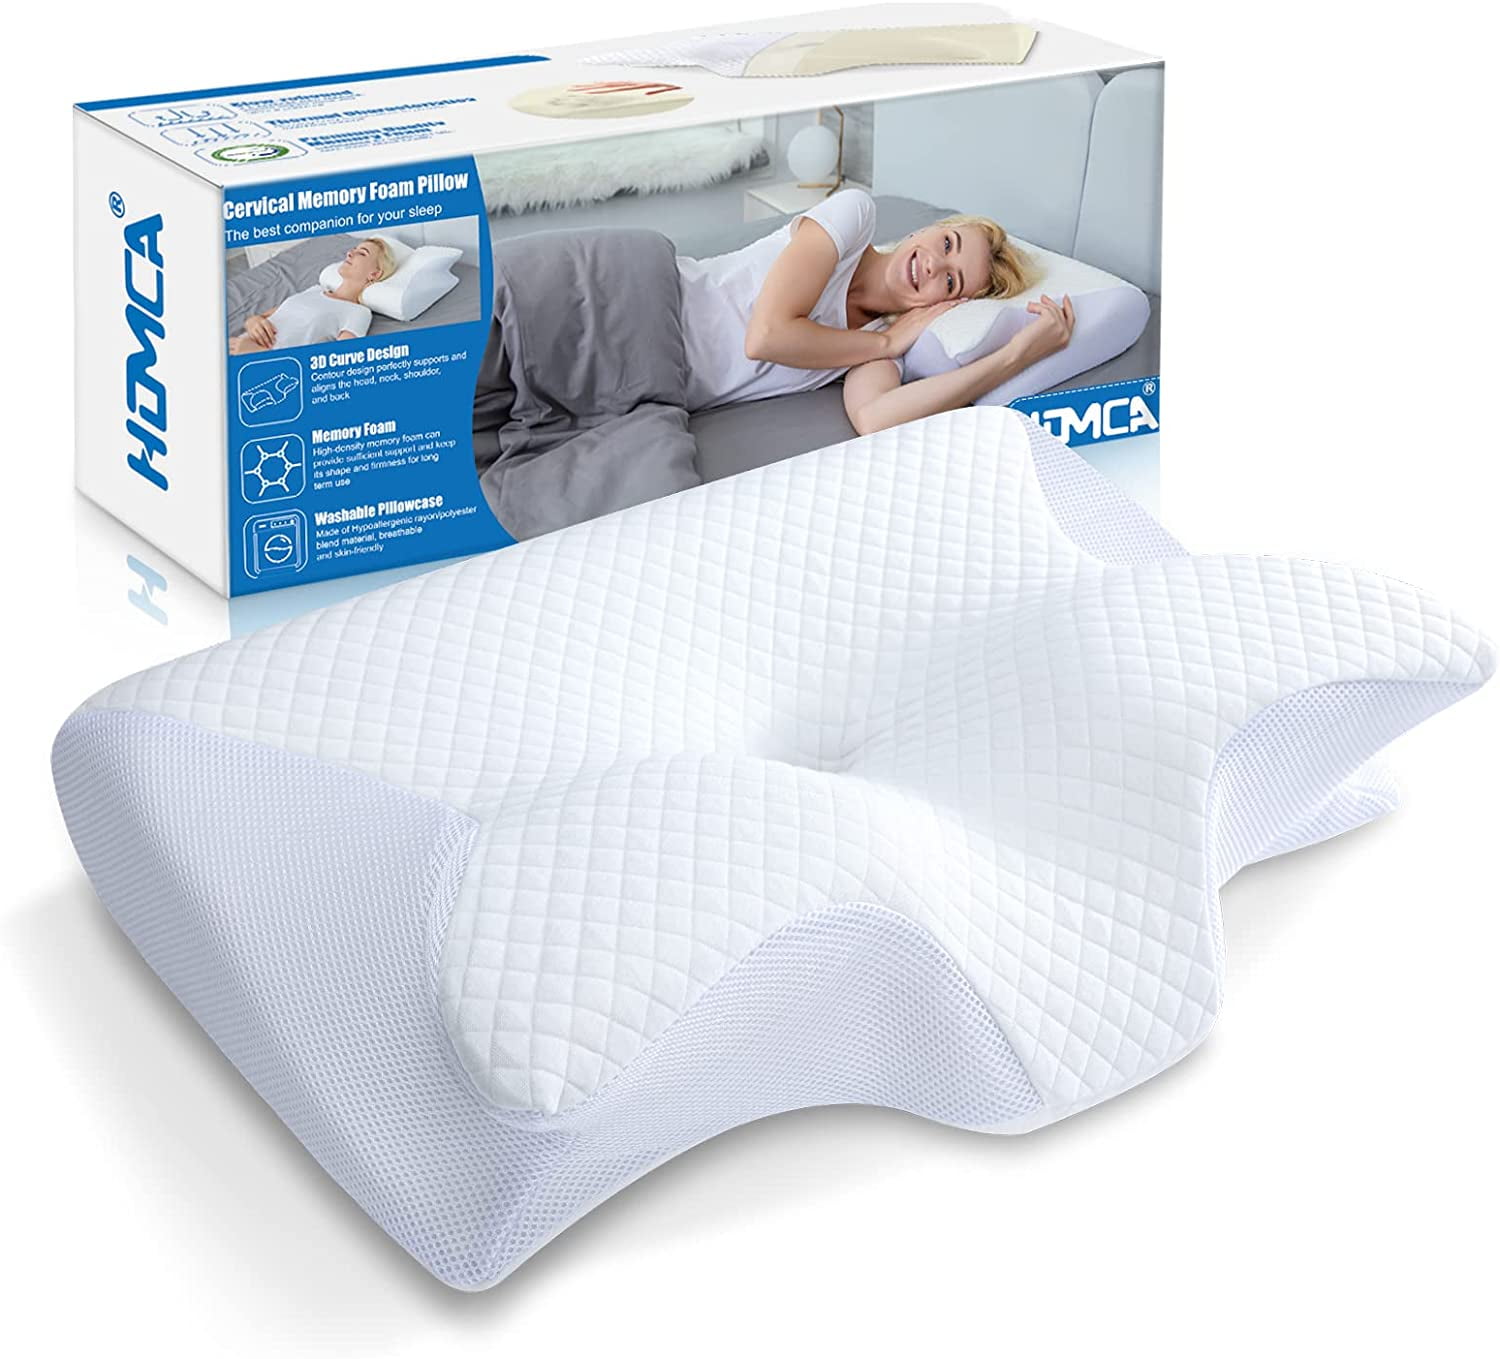 Contour Memory Foam Pillow With Cover Orthopaedic Head Neck Back Support Pillows 